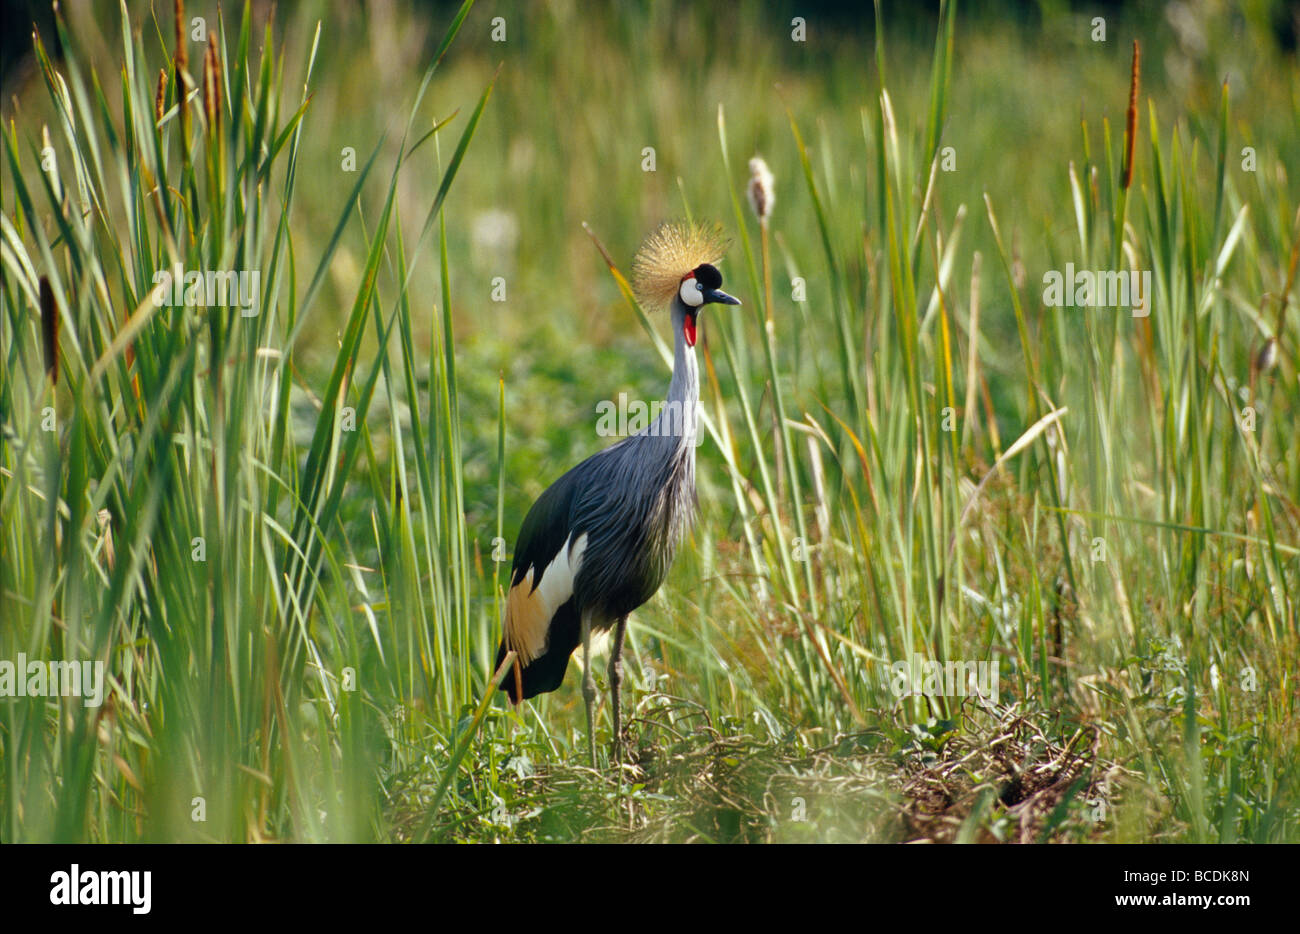 A beautifully ornate East African Crowned Crane standing in farmland. Stock Photo